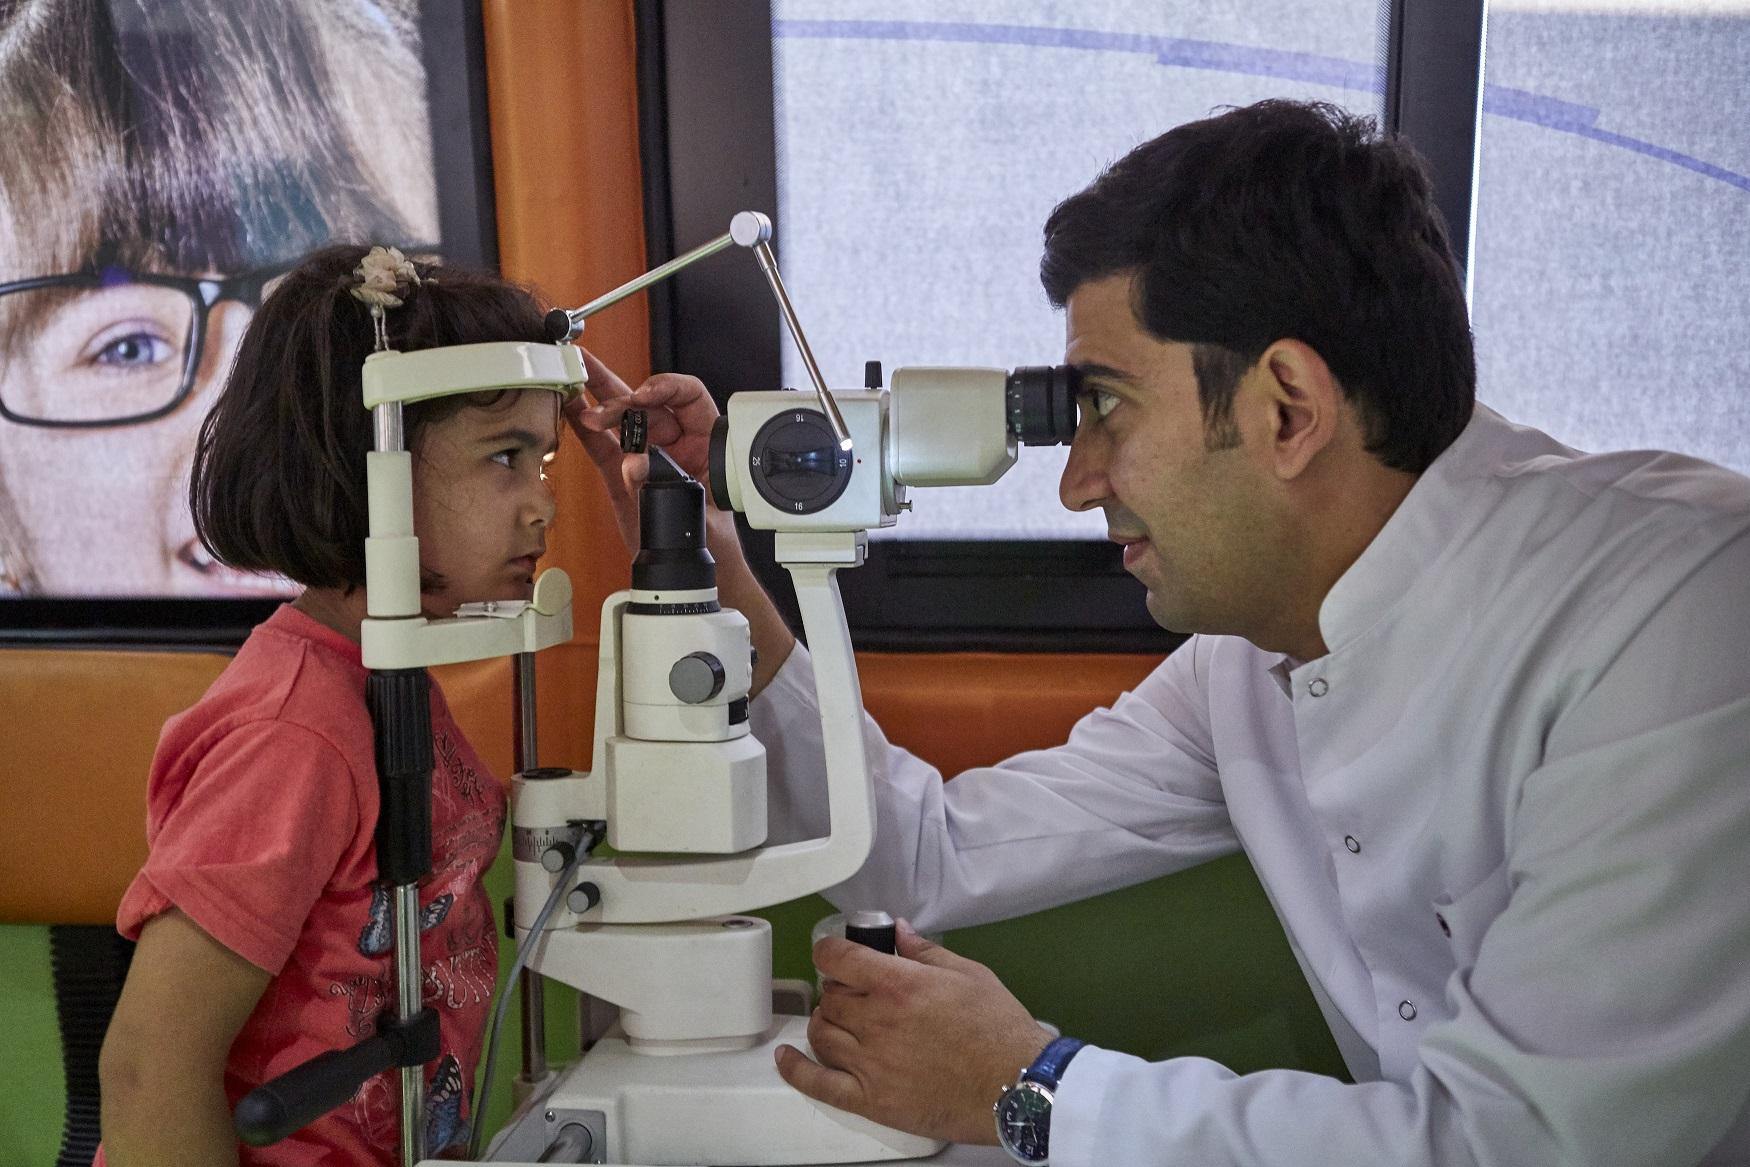 Azercell’s “Mobile Eye Clinic” provides support to over 900 people